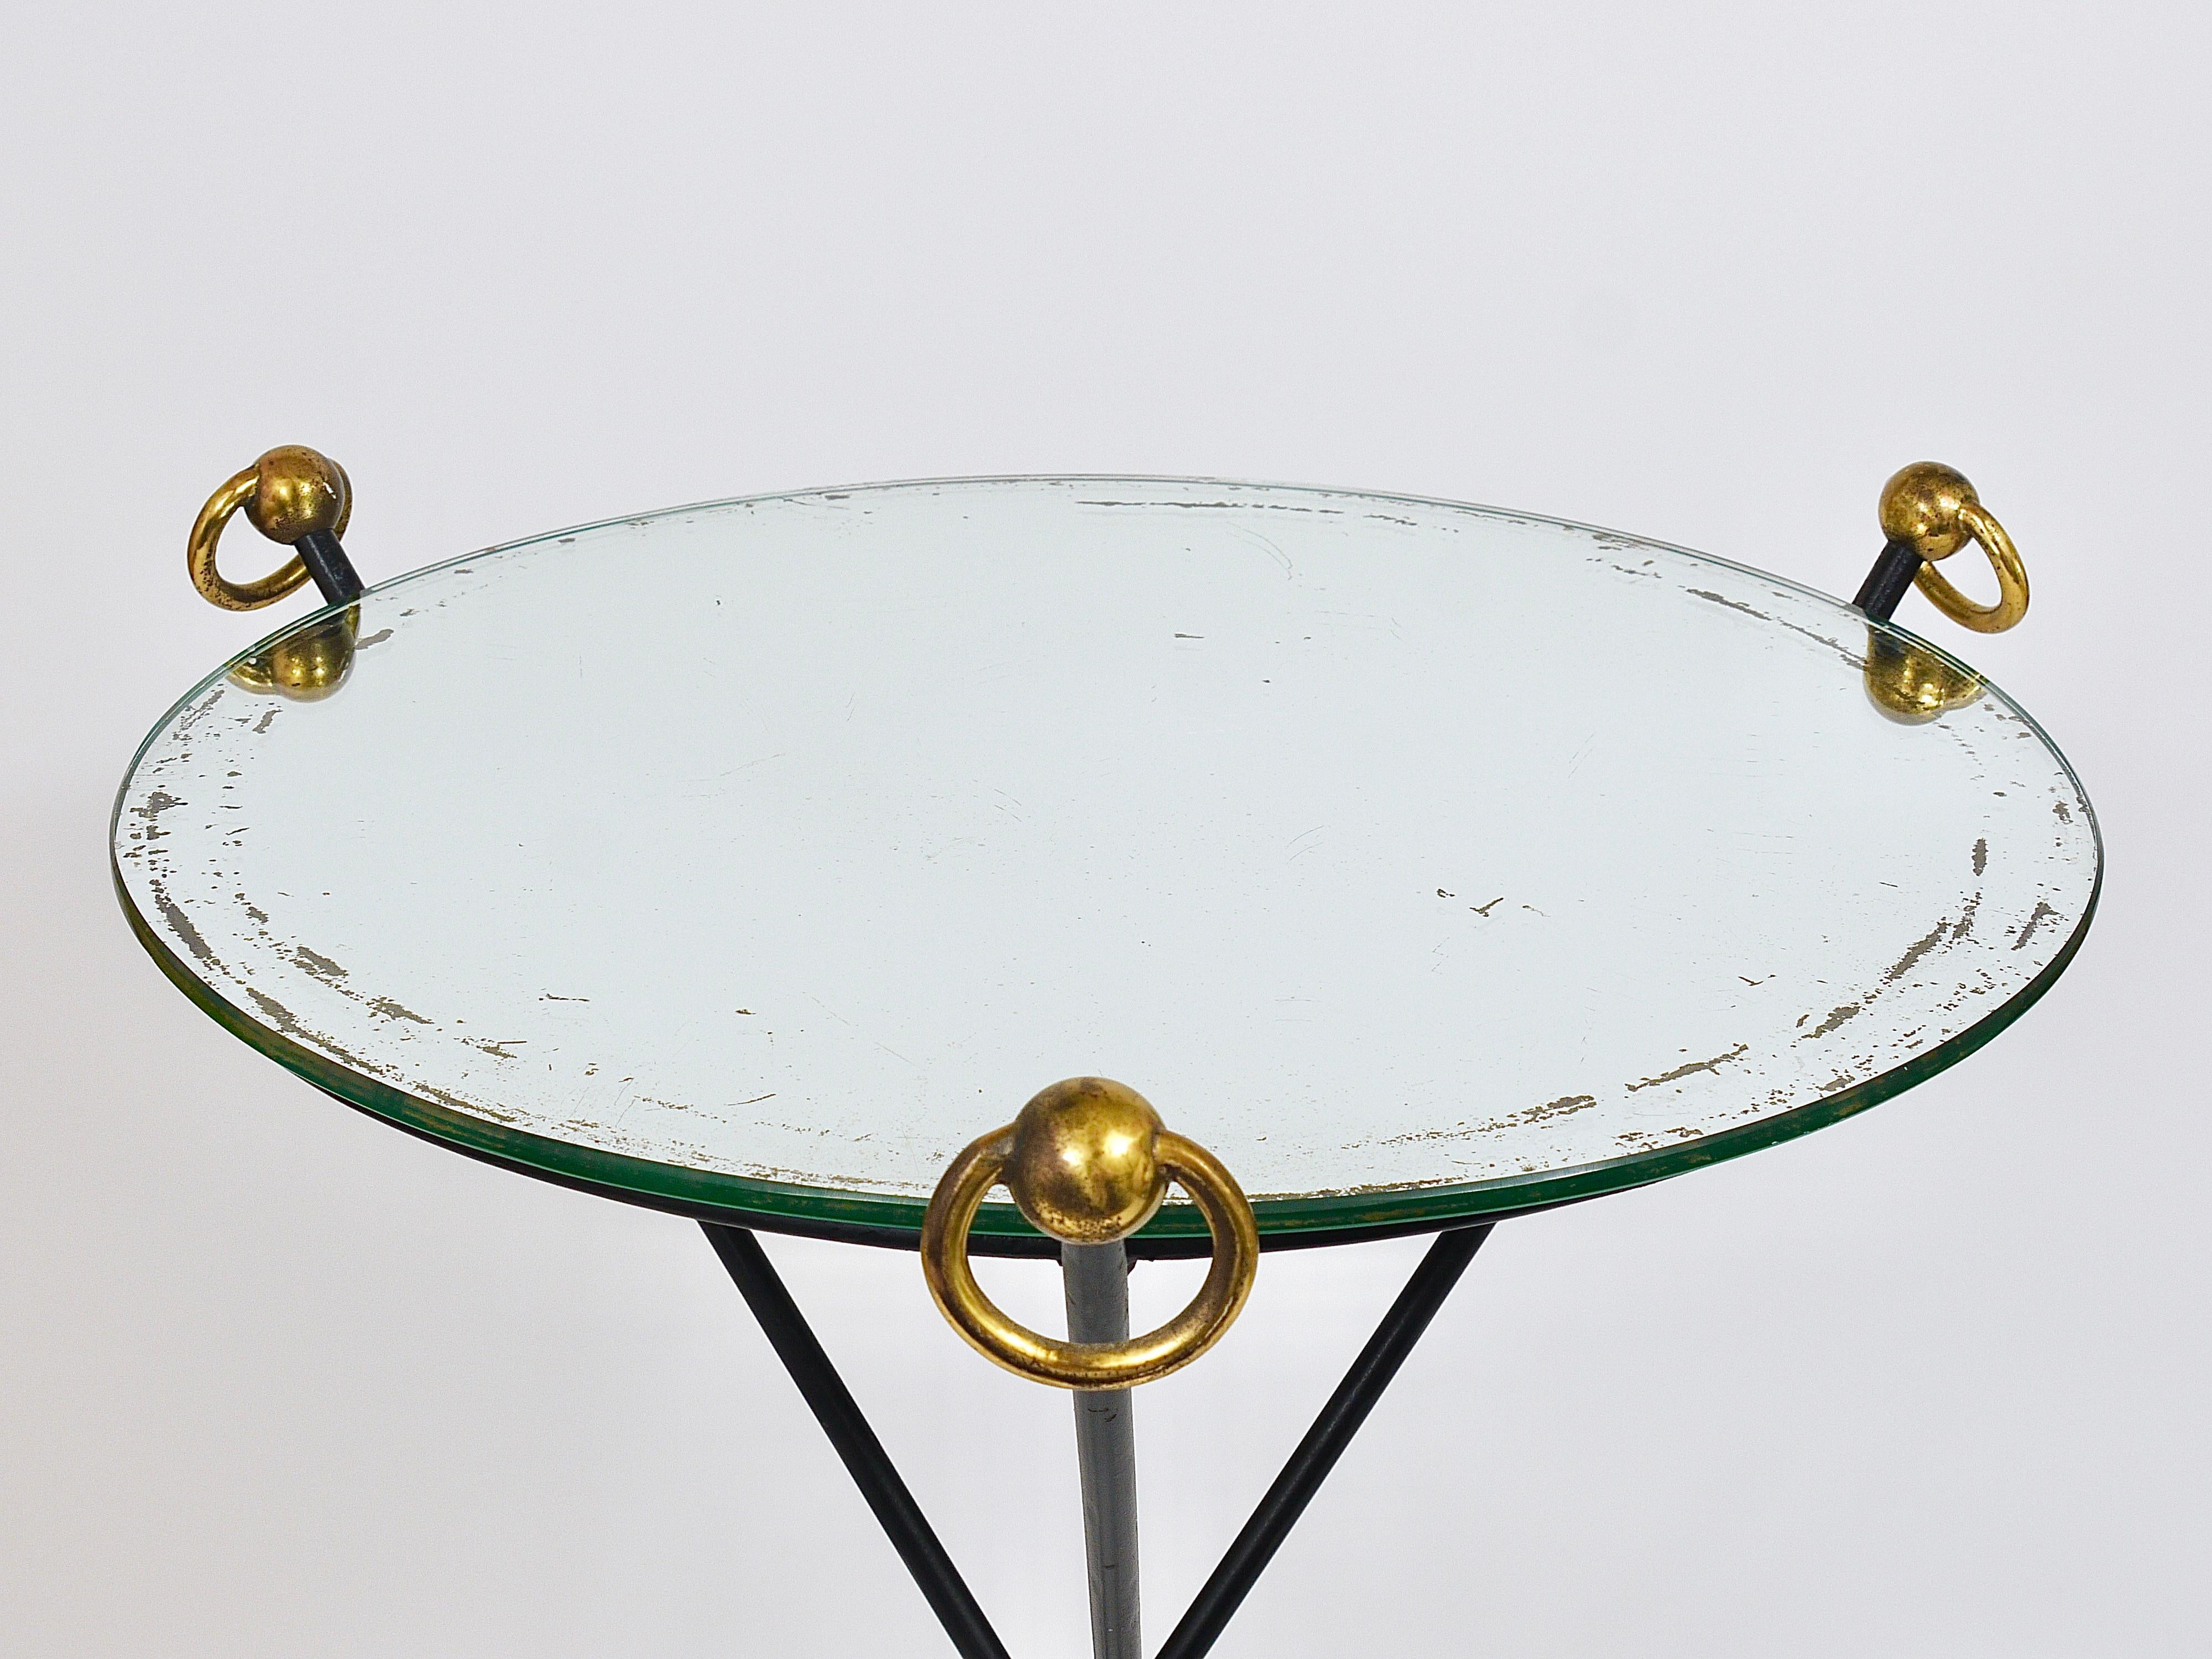 French Mid-Century Modern Mirror Side Table, Jacques Adnet Style, Brass, 1950s For Sale 3